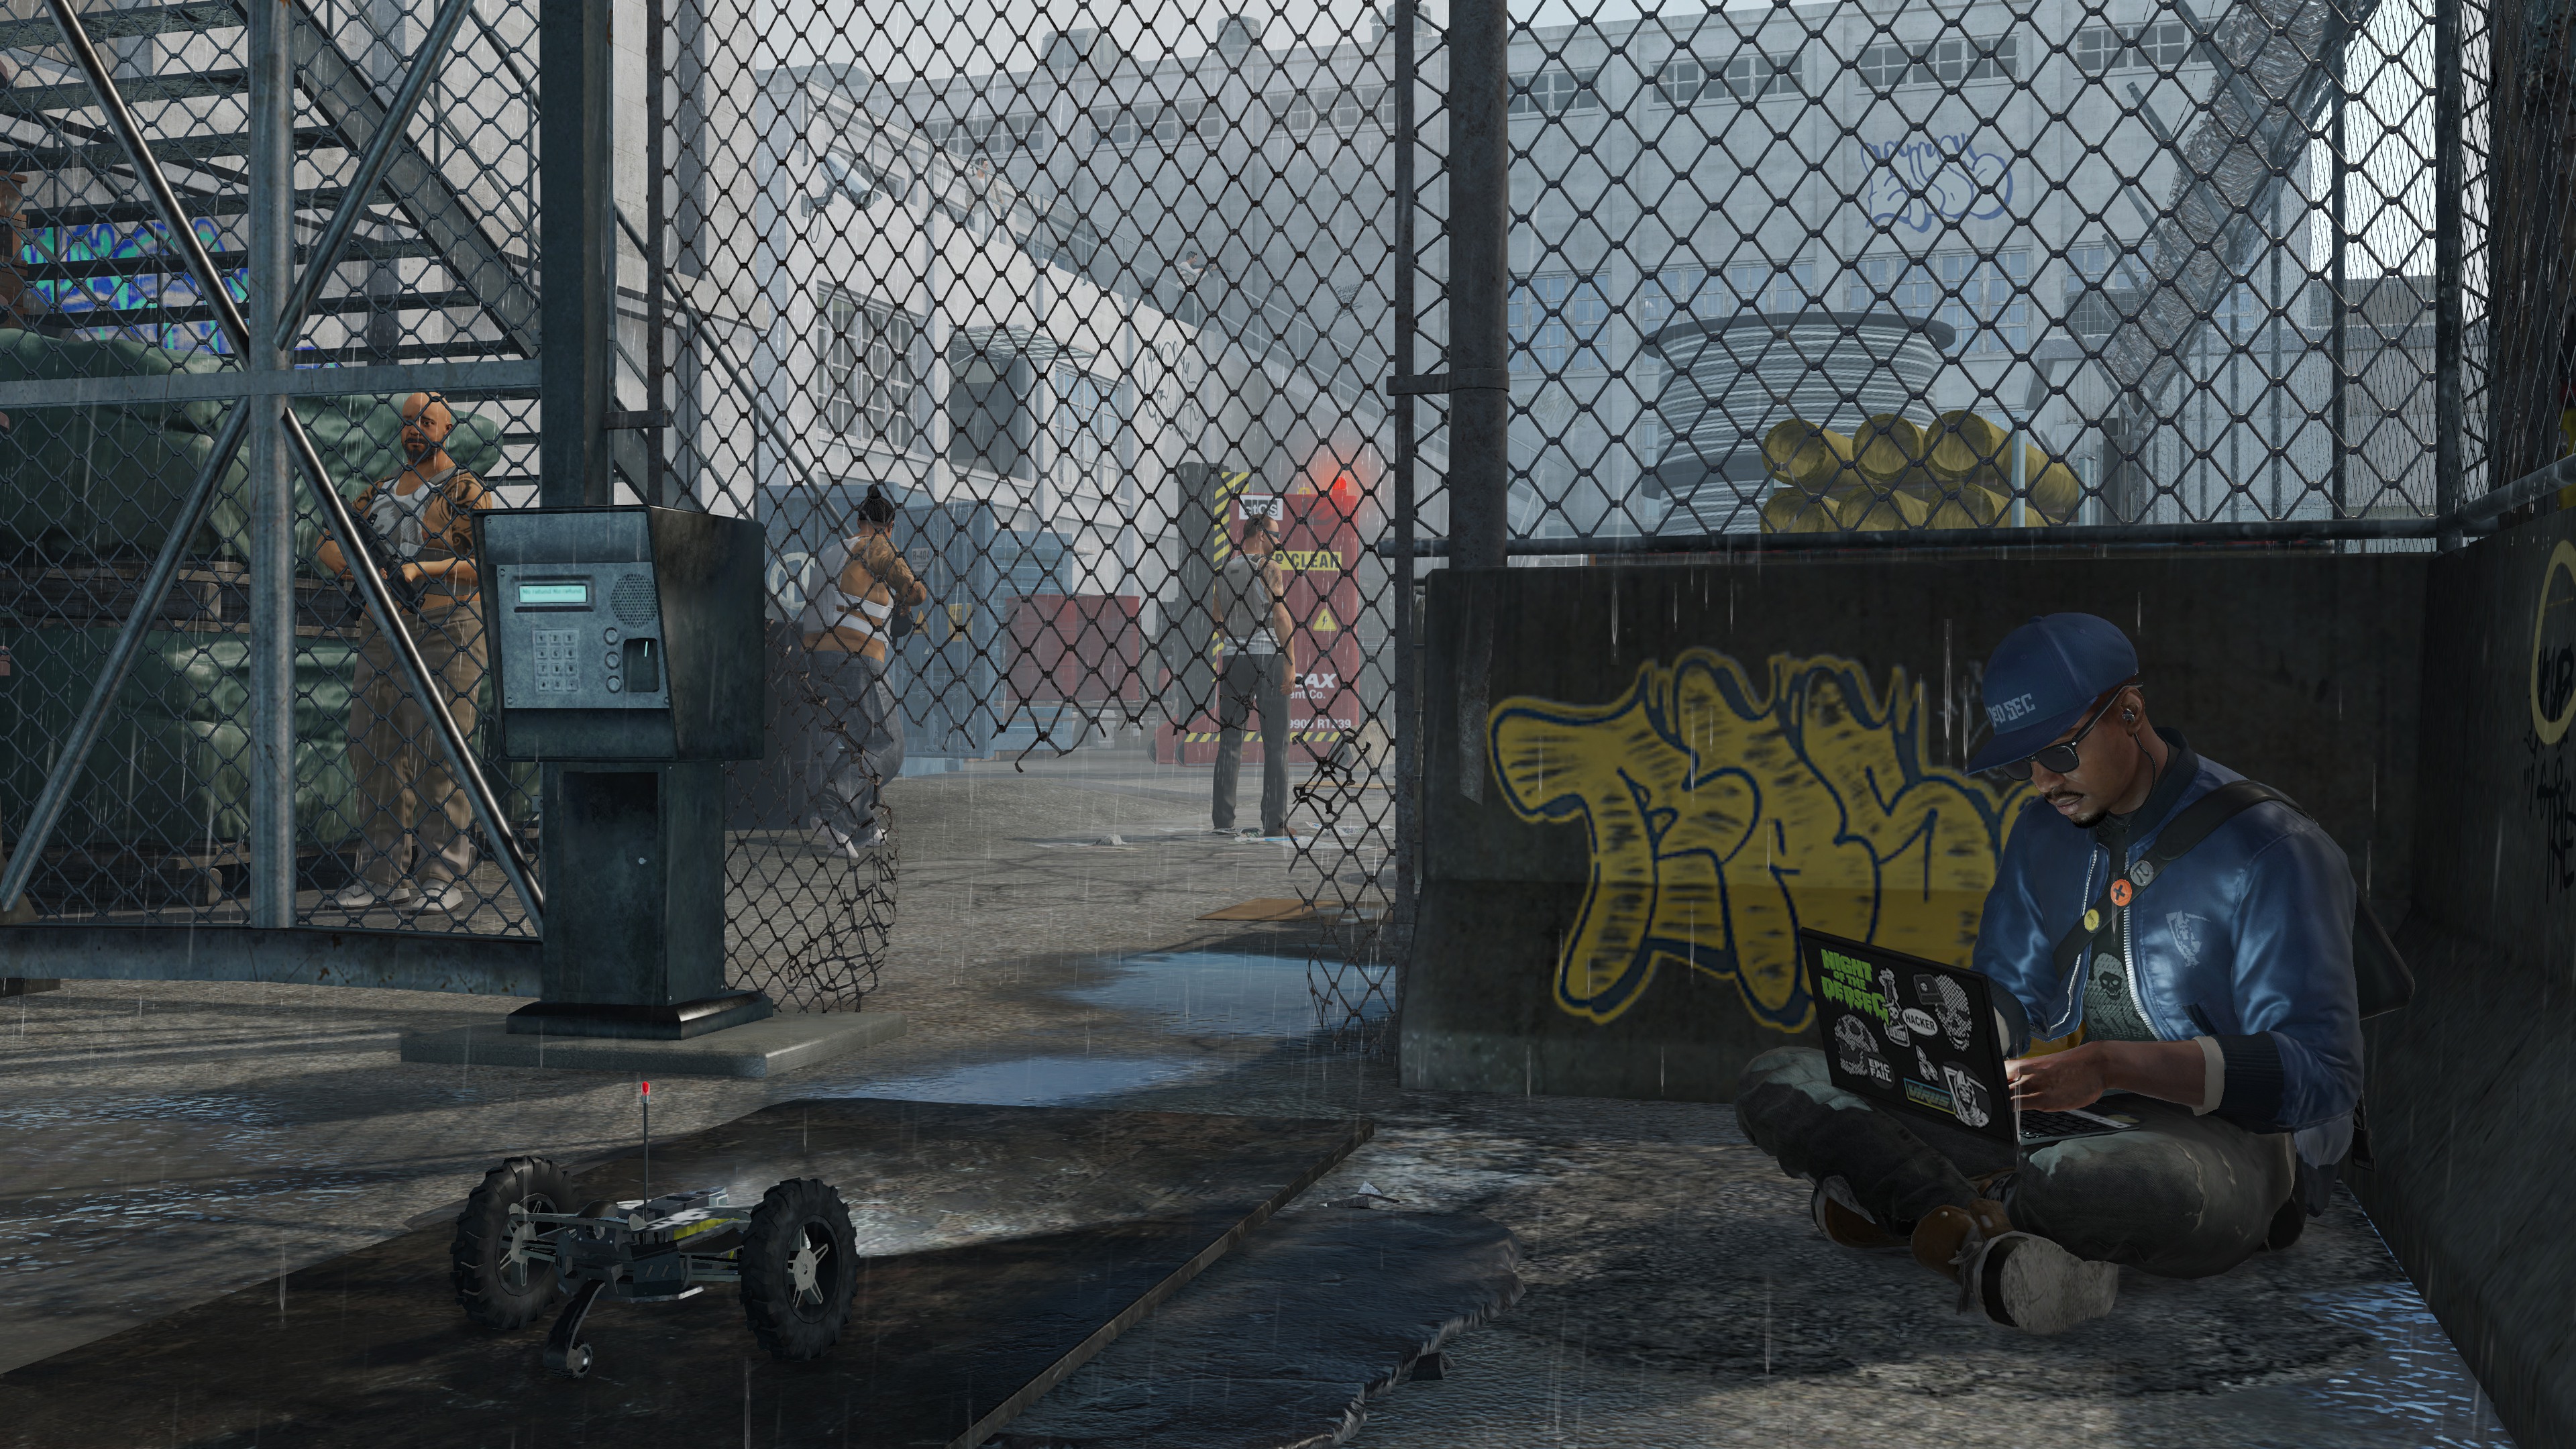 watch dogs 2, video game, marcus holloway, watch dogs